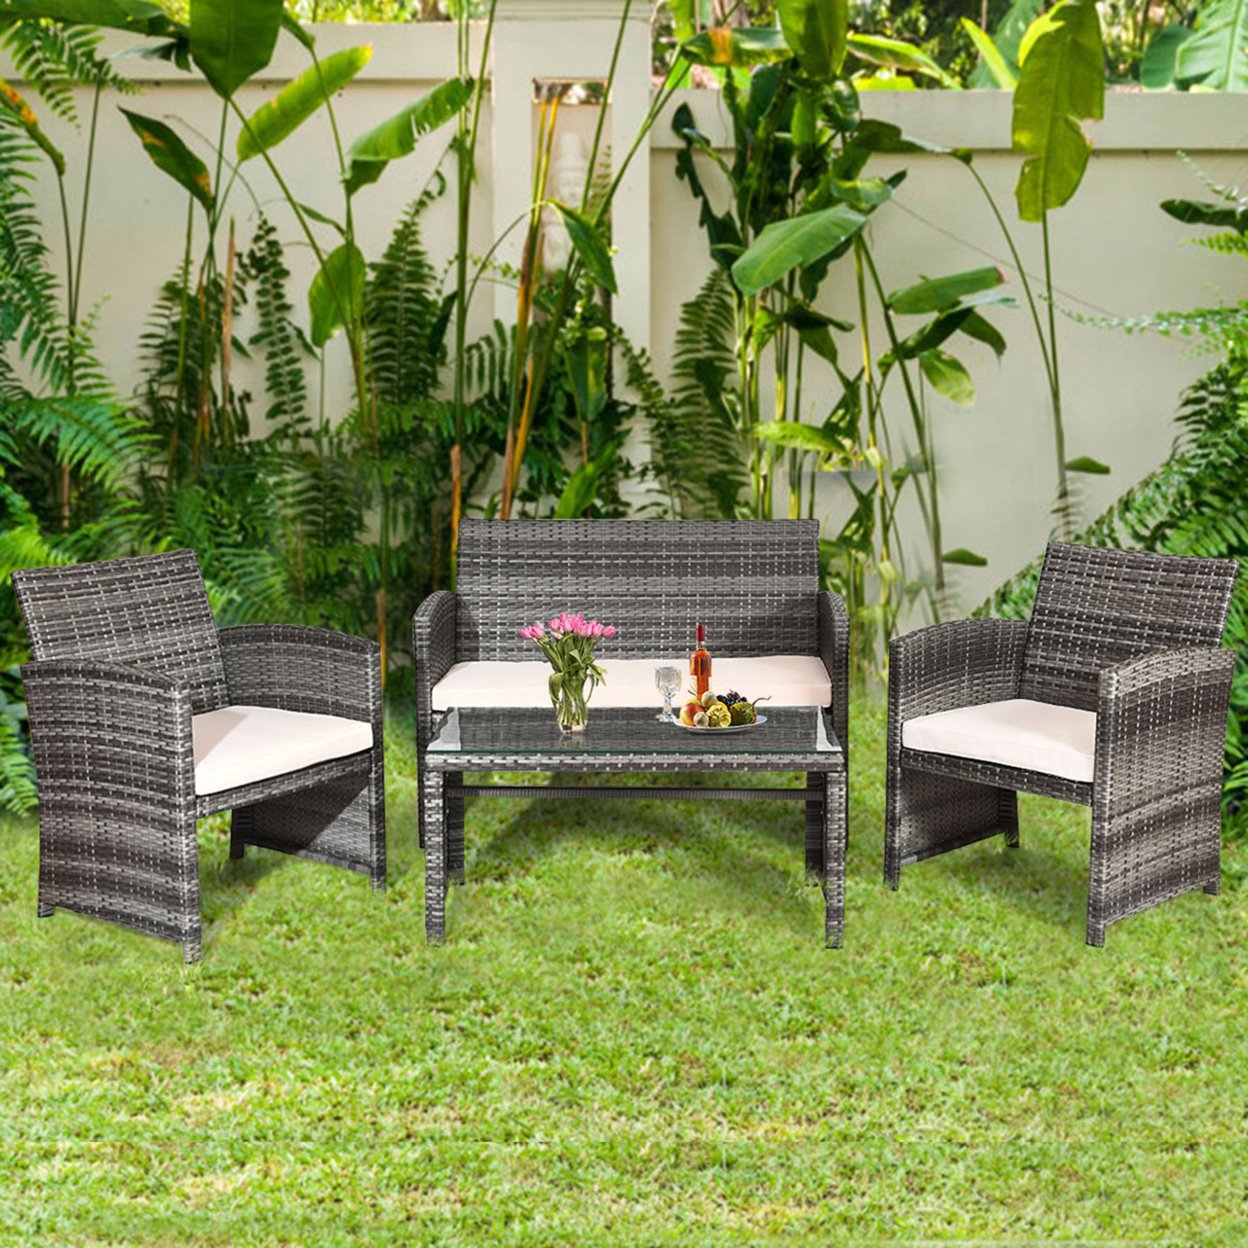 Gymax 4PCS Patio Outdoor Rattan Furniture Set W/ Cushioned Chair Loveseat Table